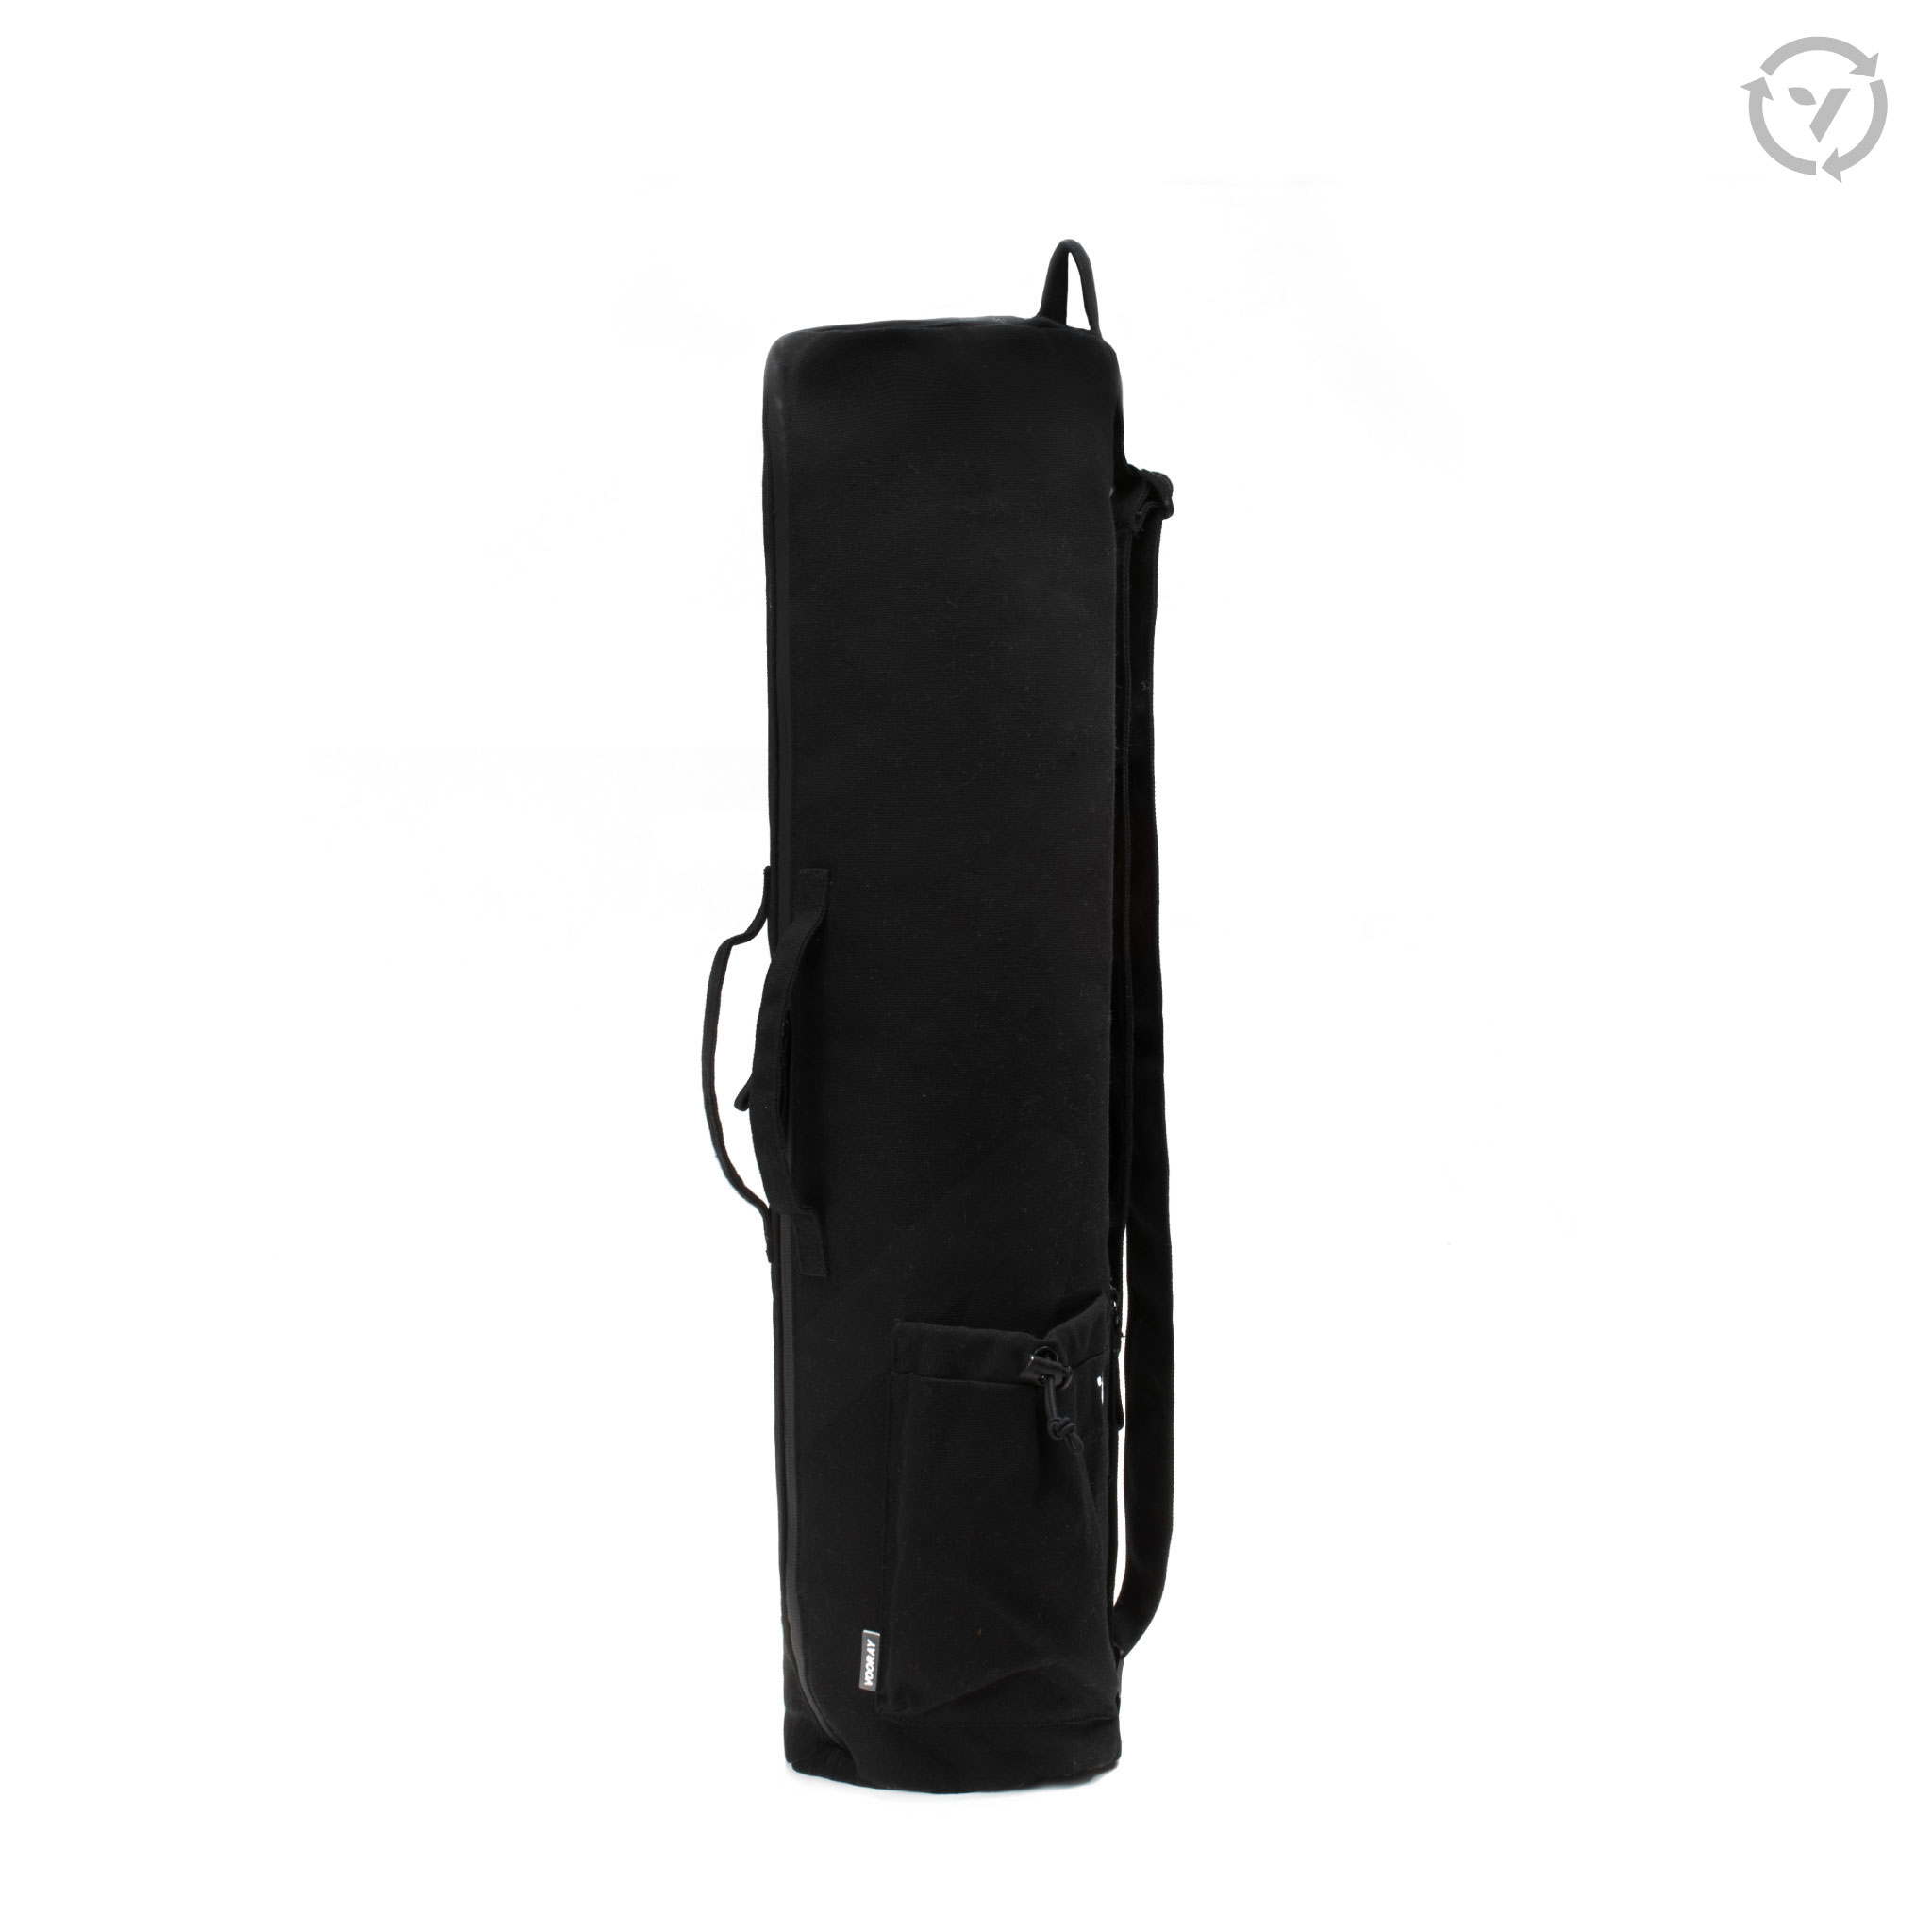 VOORAY Available Yoga Bag Organic Obsidian